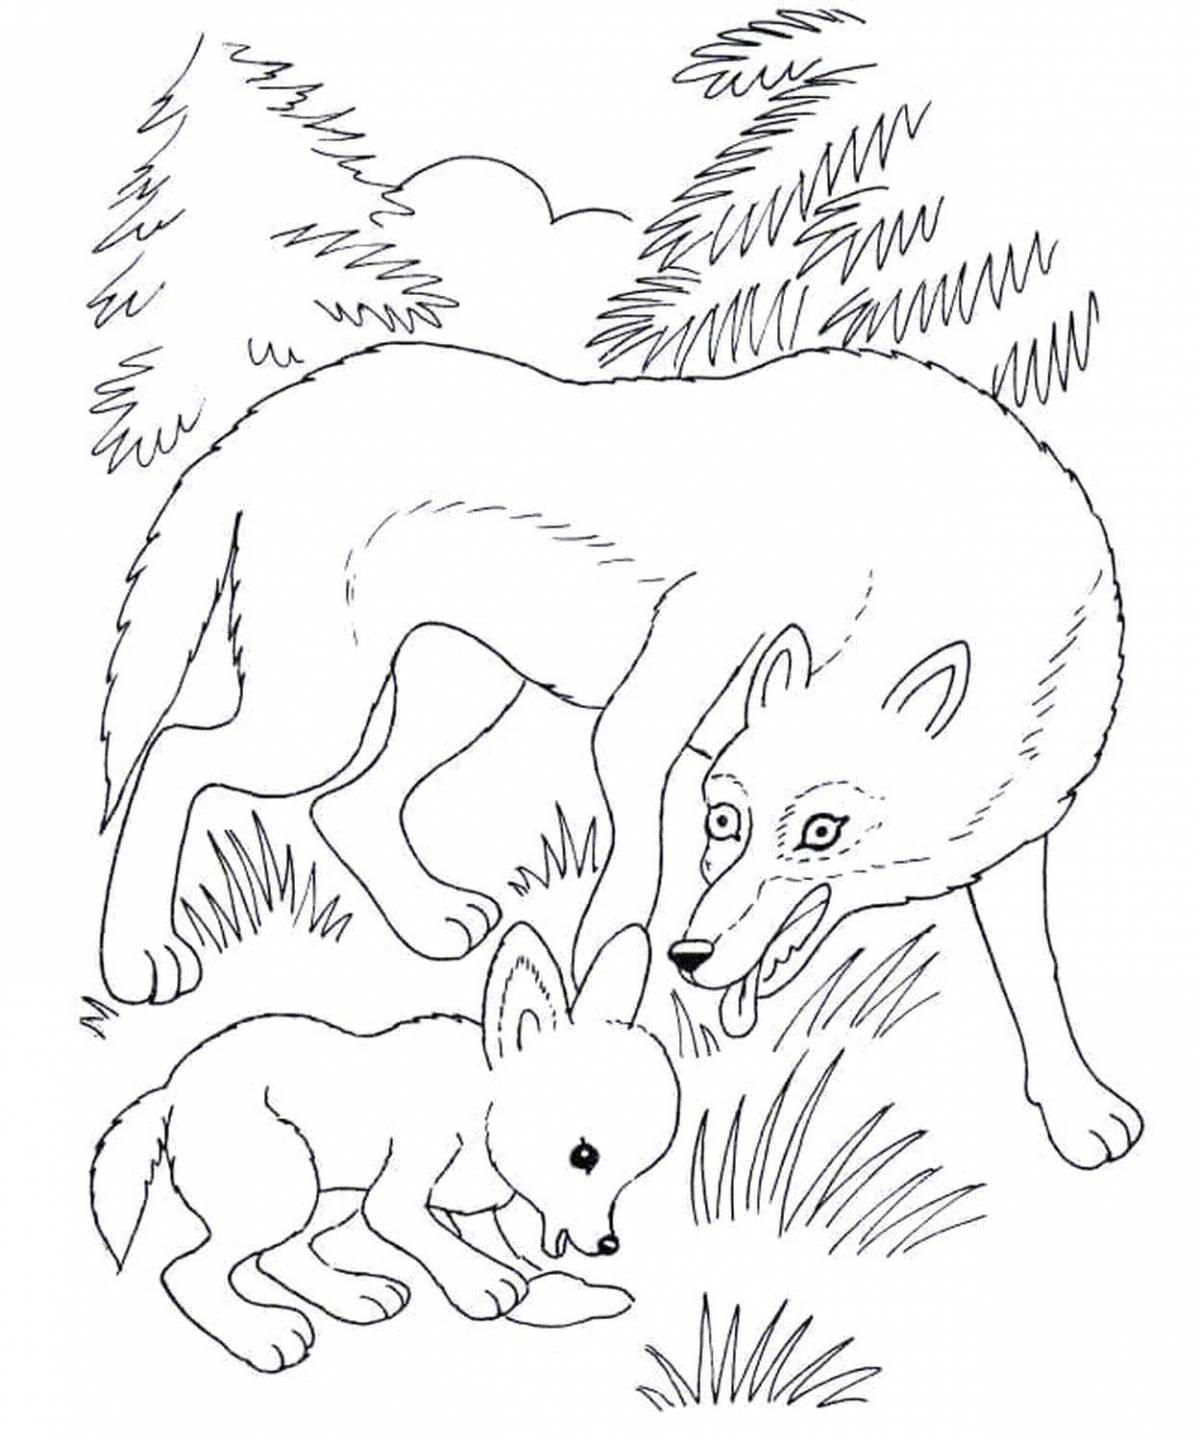 Amazing wild animal coloring page for 6-7 year olds